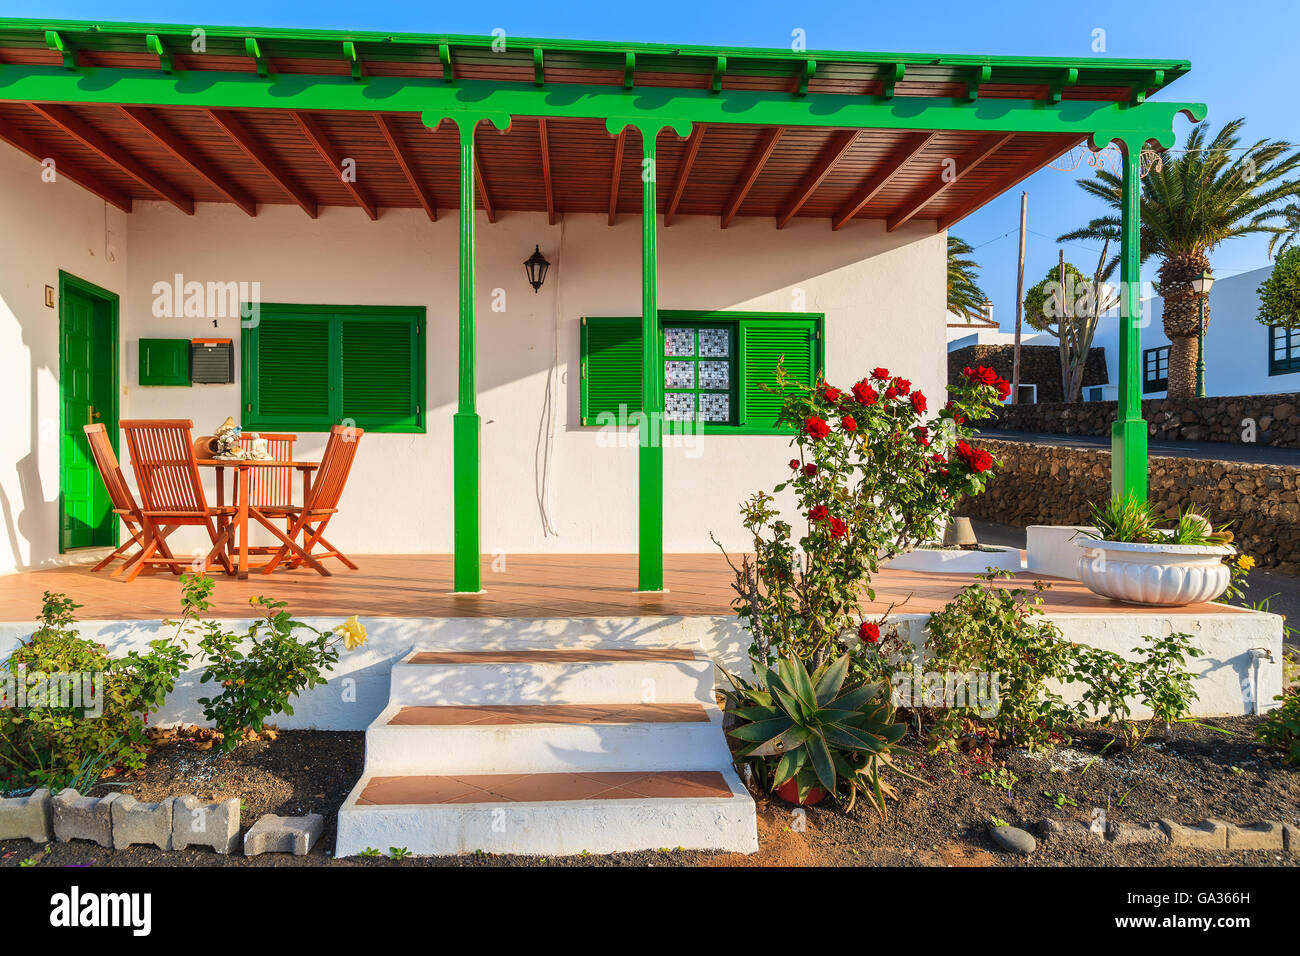 LANZAROTE ISLAND, SPAIN - JAN 15, 2015: typical white house with green door and windows in Las Brenas village. Lanzarote island is popular place to buy residential properties for winter vacation. Stock Photo